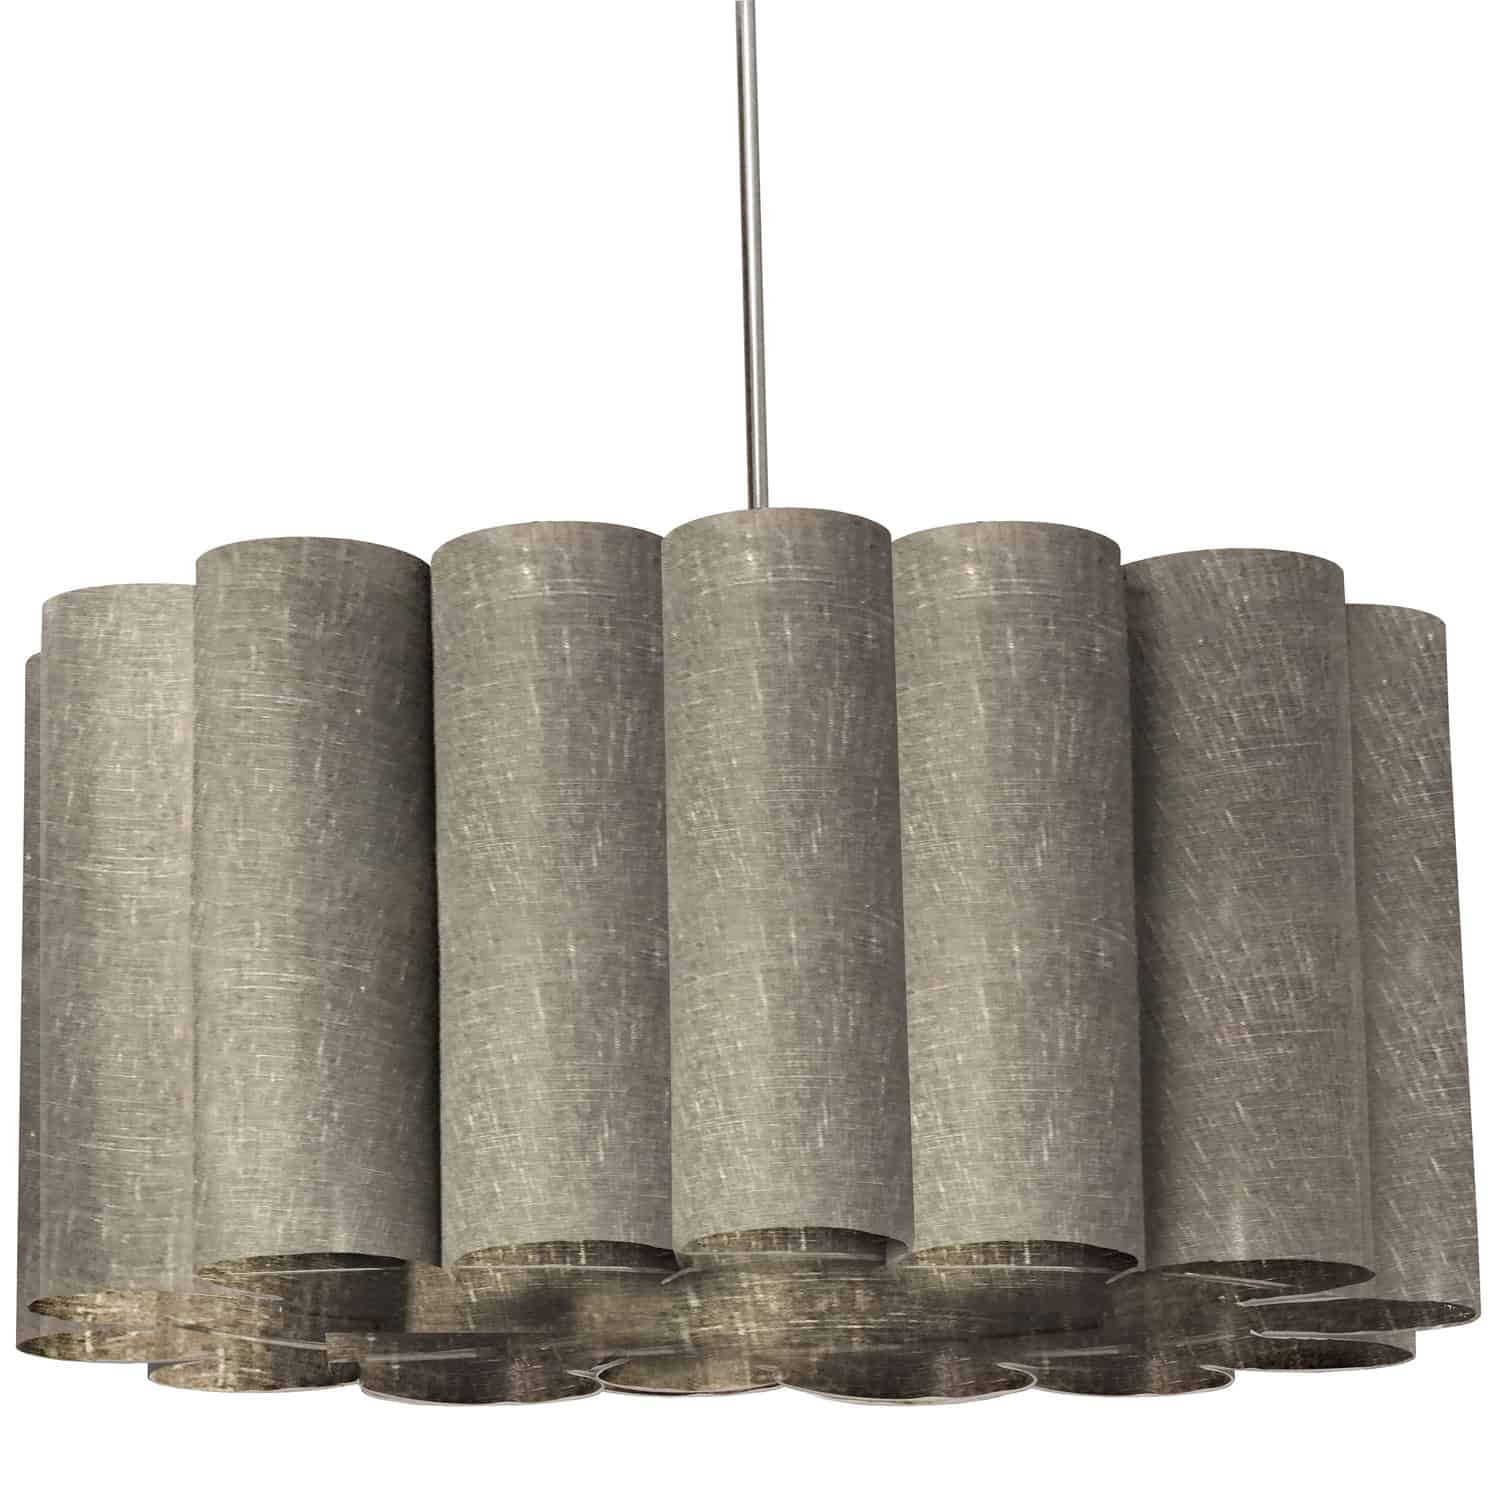 Pretty Sandra lighting offers a textural and artistic appeal that will enhance the furnishing around it. It's a fashionable look with a Parisian-style couture flair. The simple metal drop and frame are discrete, putting the spotlight on the chic fabric shade. The classic straight drum shape is enhanced with a scalloped texture, available in a variety of fabric colors. With its noticeable presence and air of luxury, the Sandra family of lighting adds an instant focal point to kitchens, living and dining rooms.